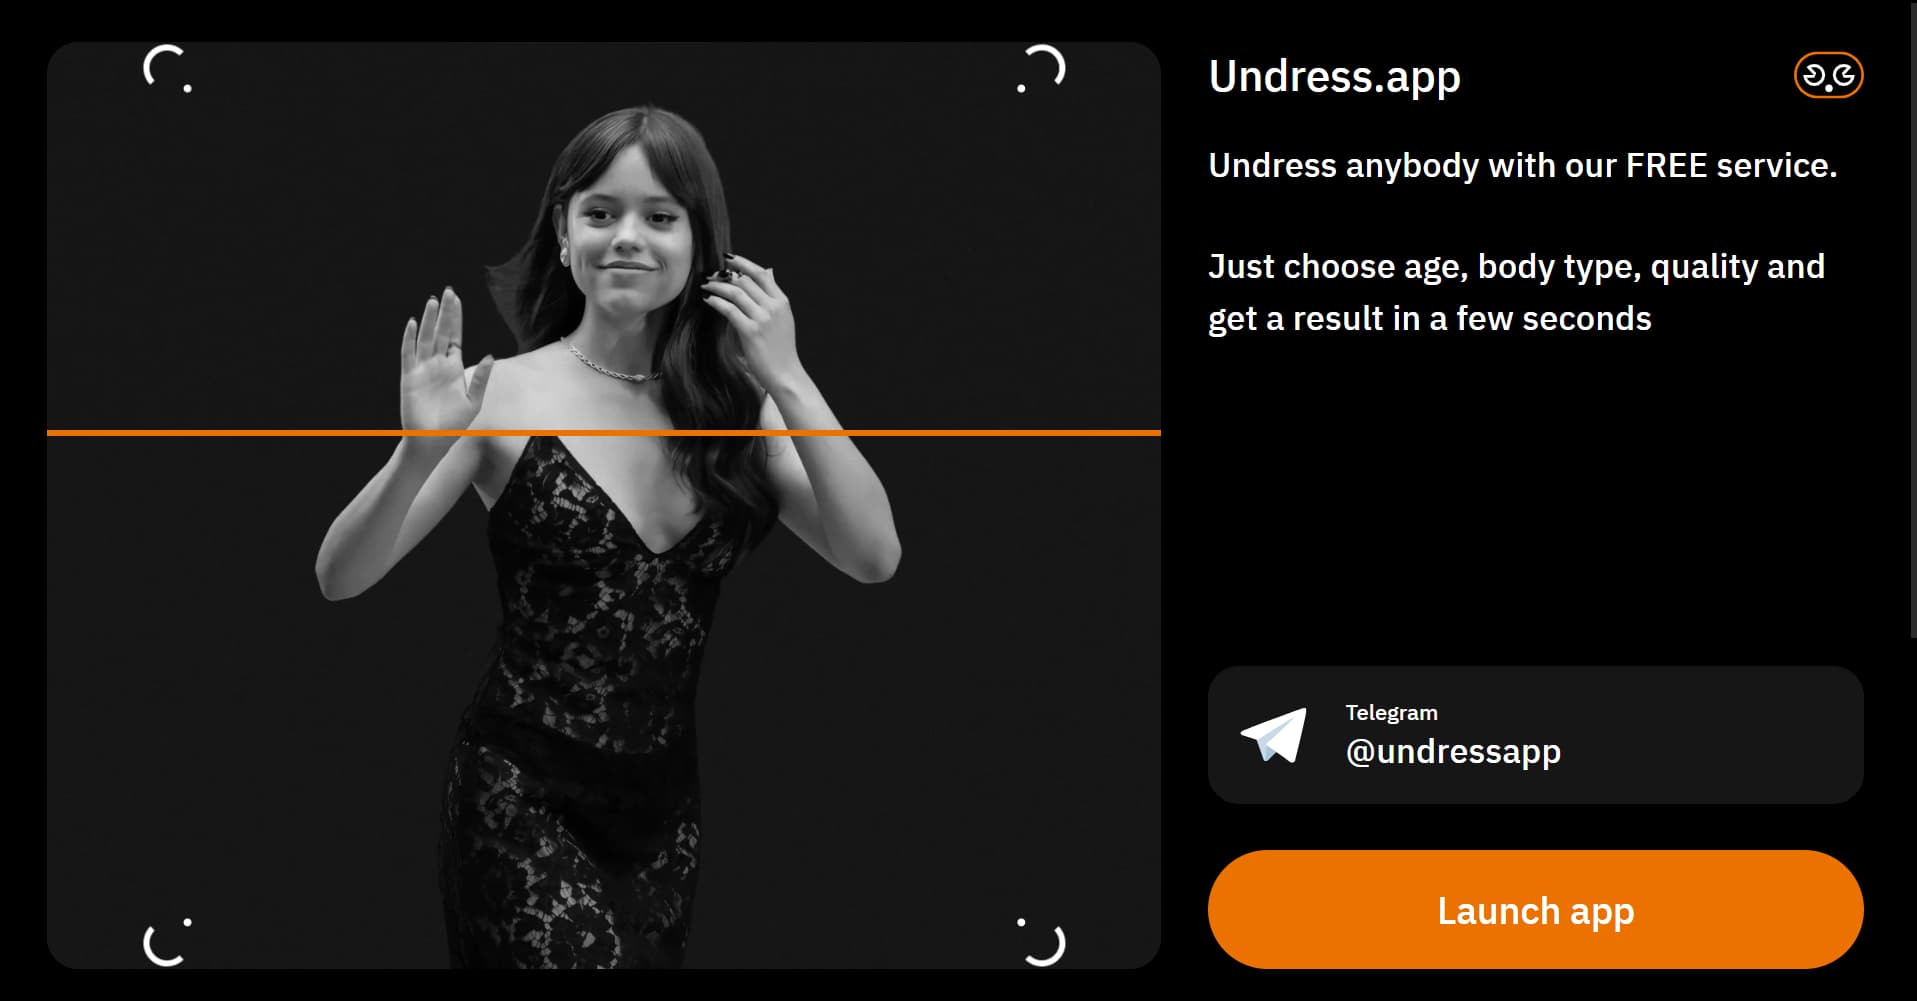 Free undress apps